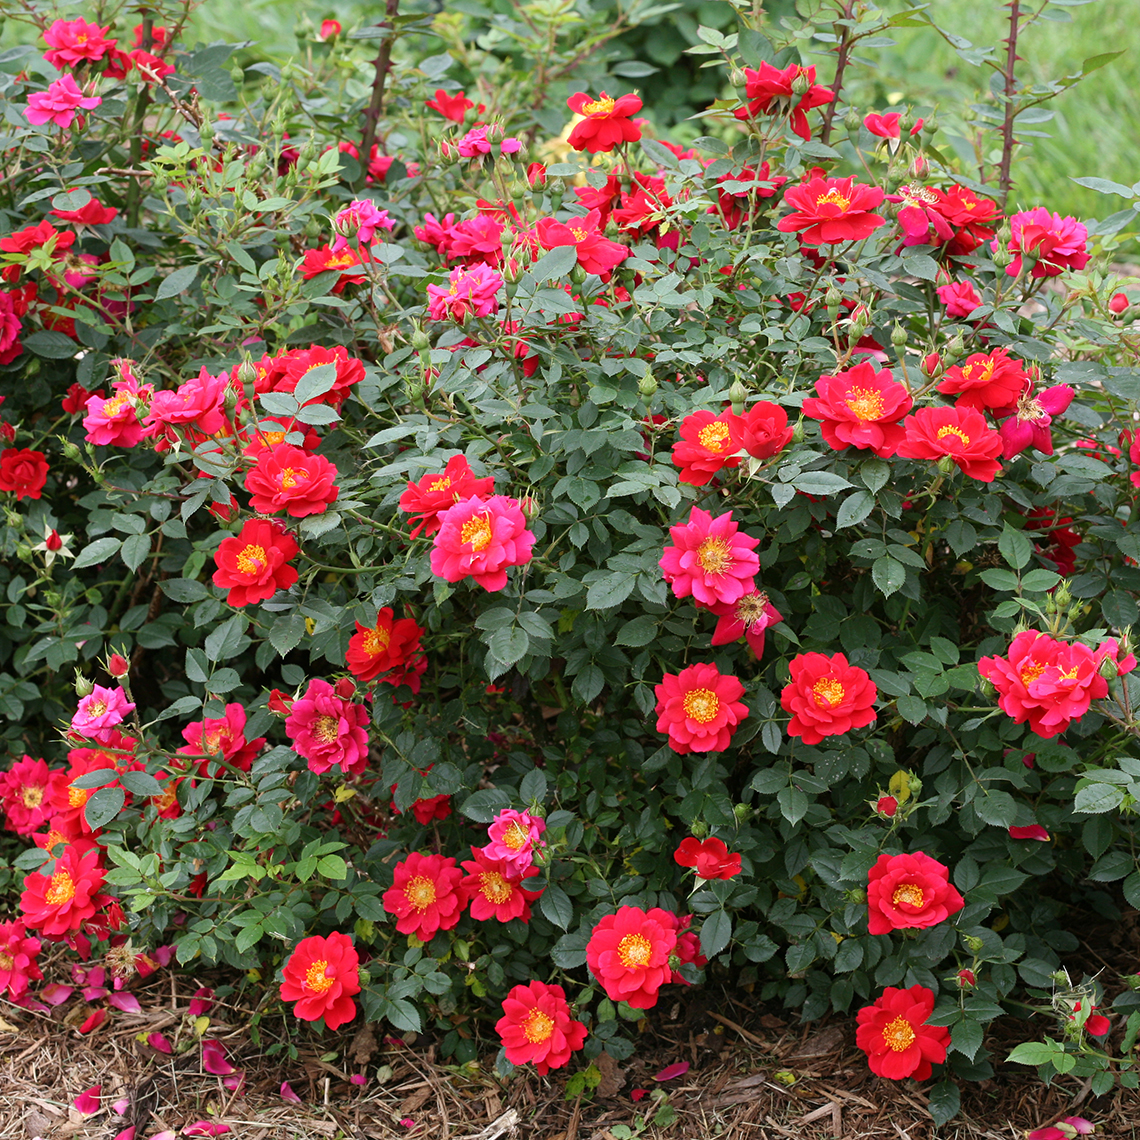 Heavy blooming Oso Easy Urban Legend rose with dozen of deep red blooms